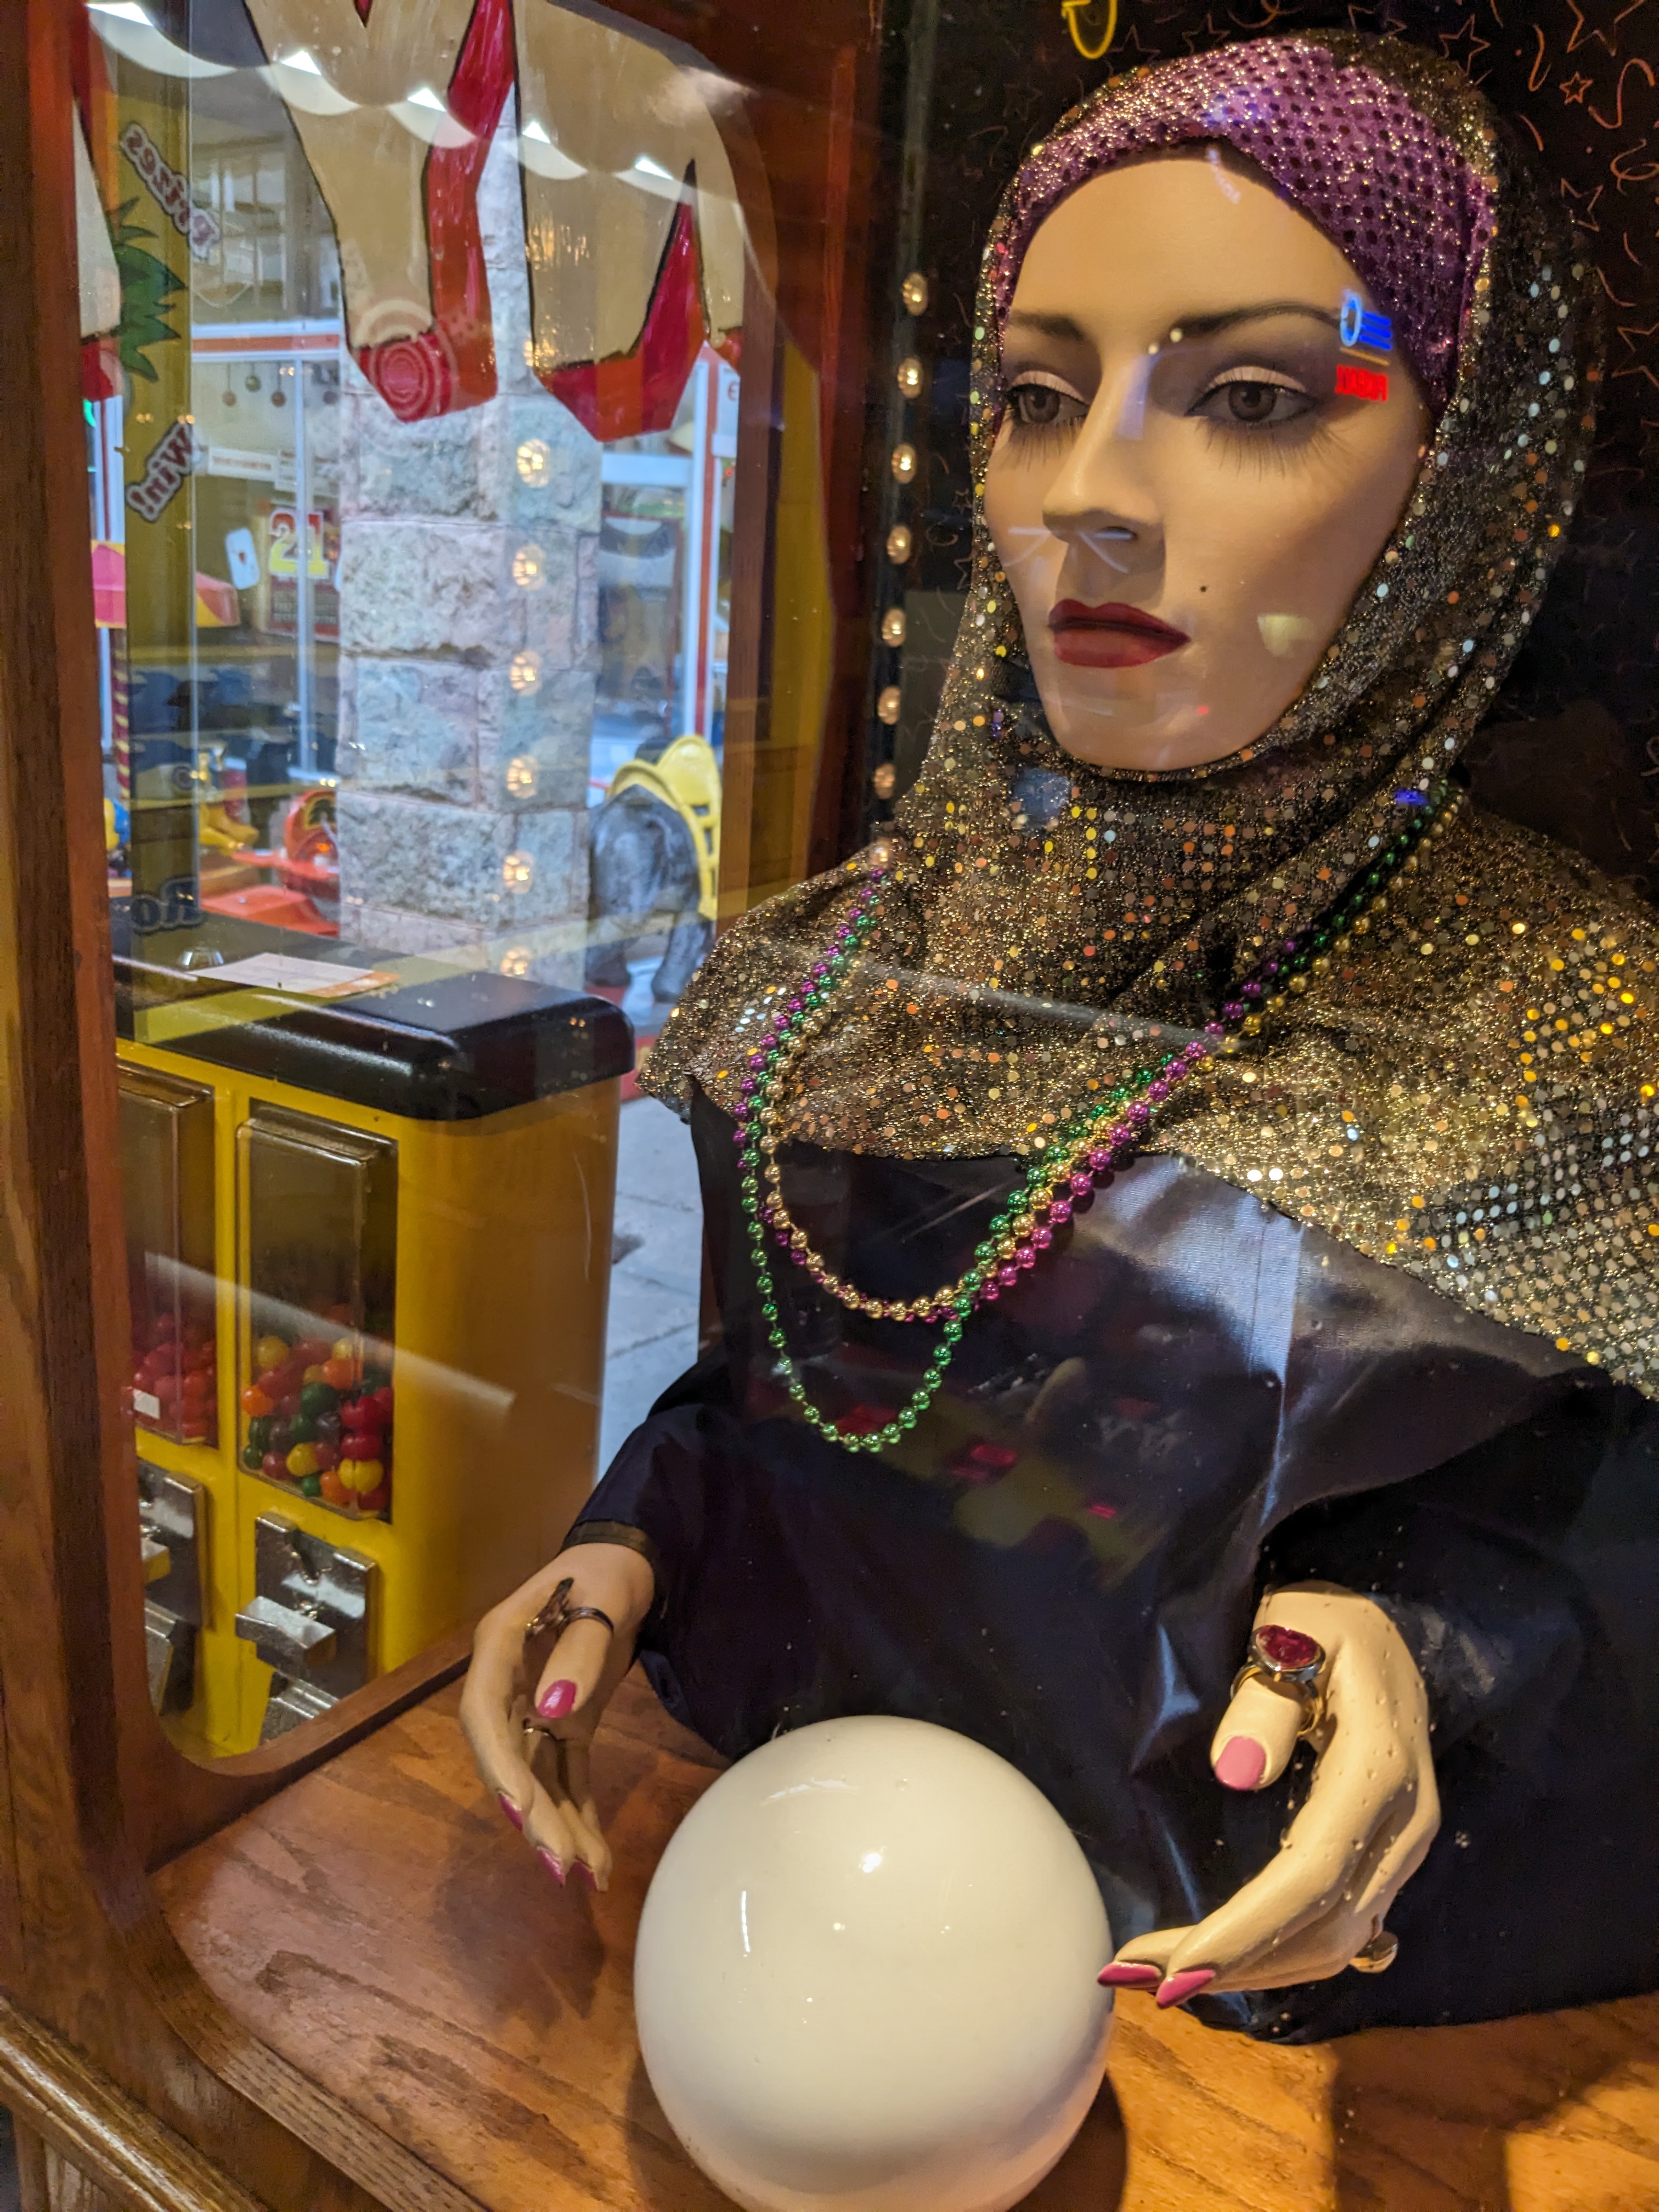 Mechanical fortune telling lady, with crystal ball